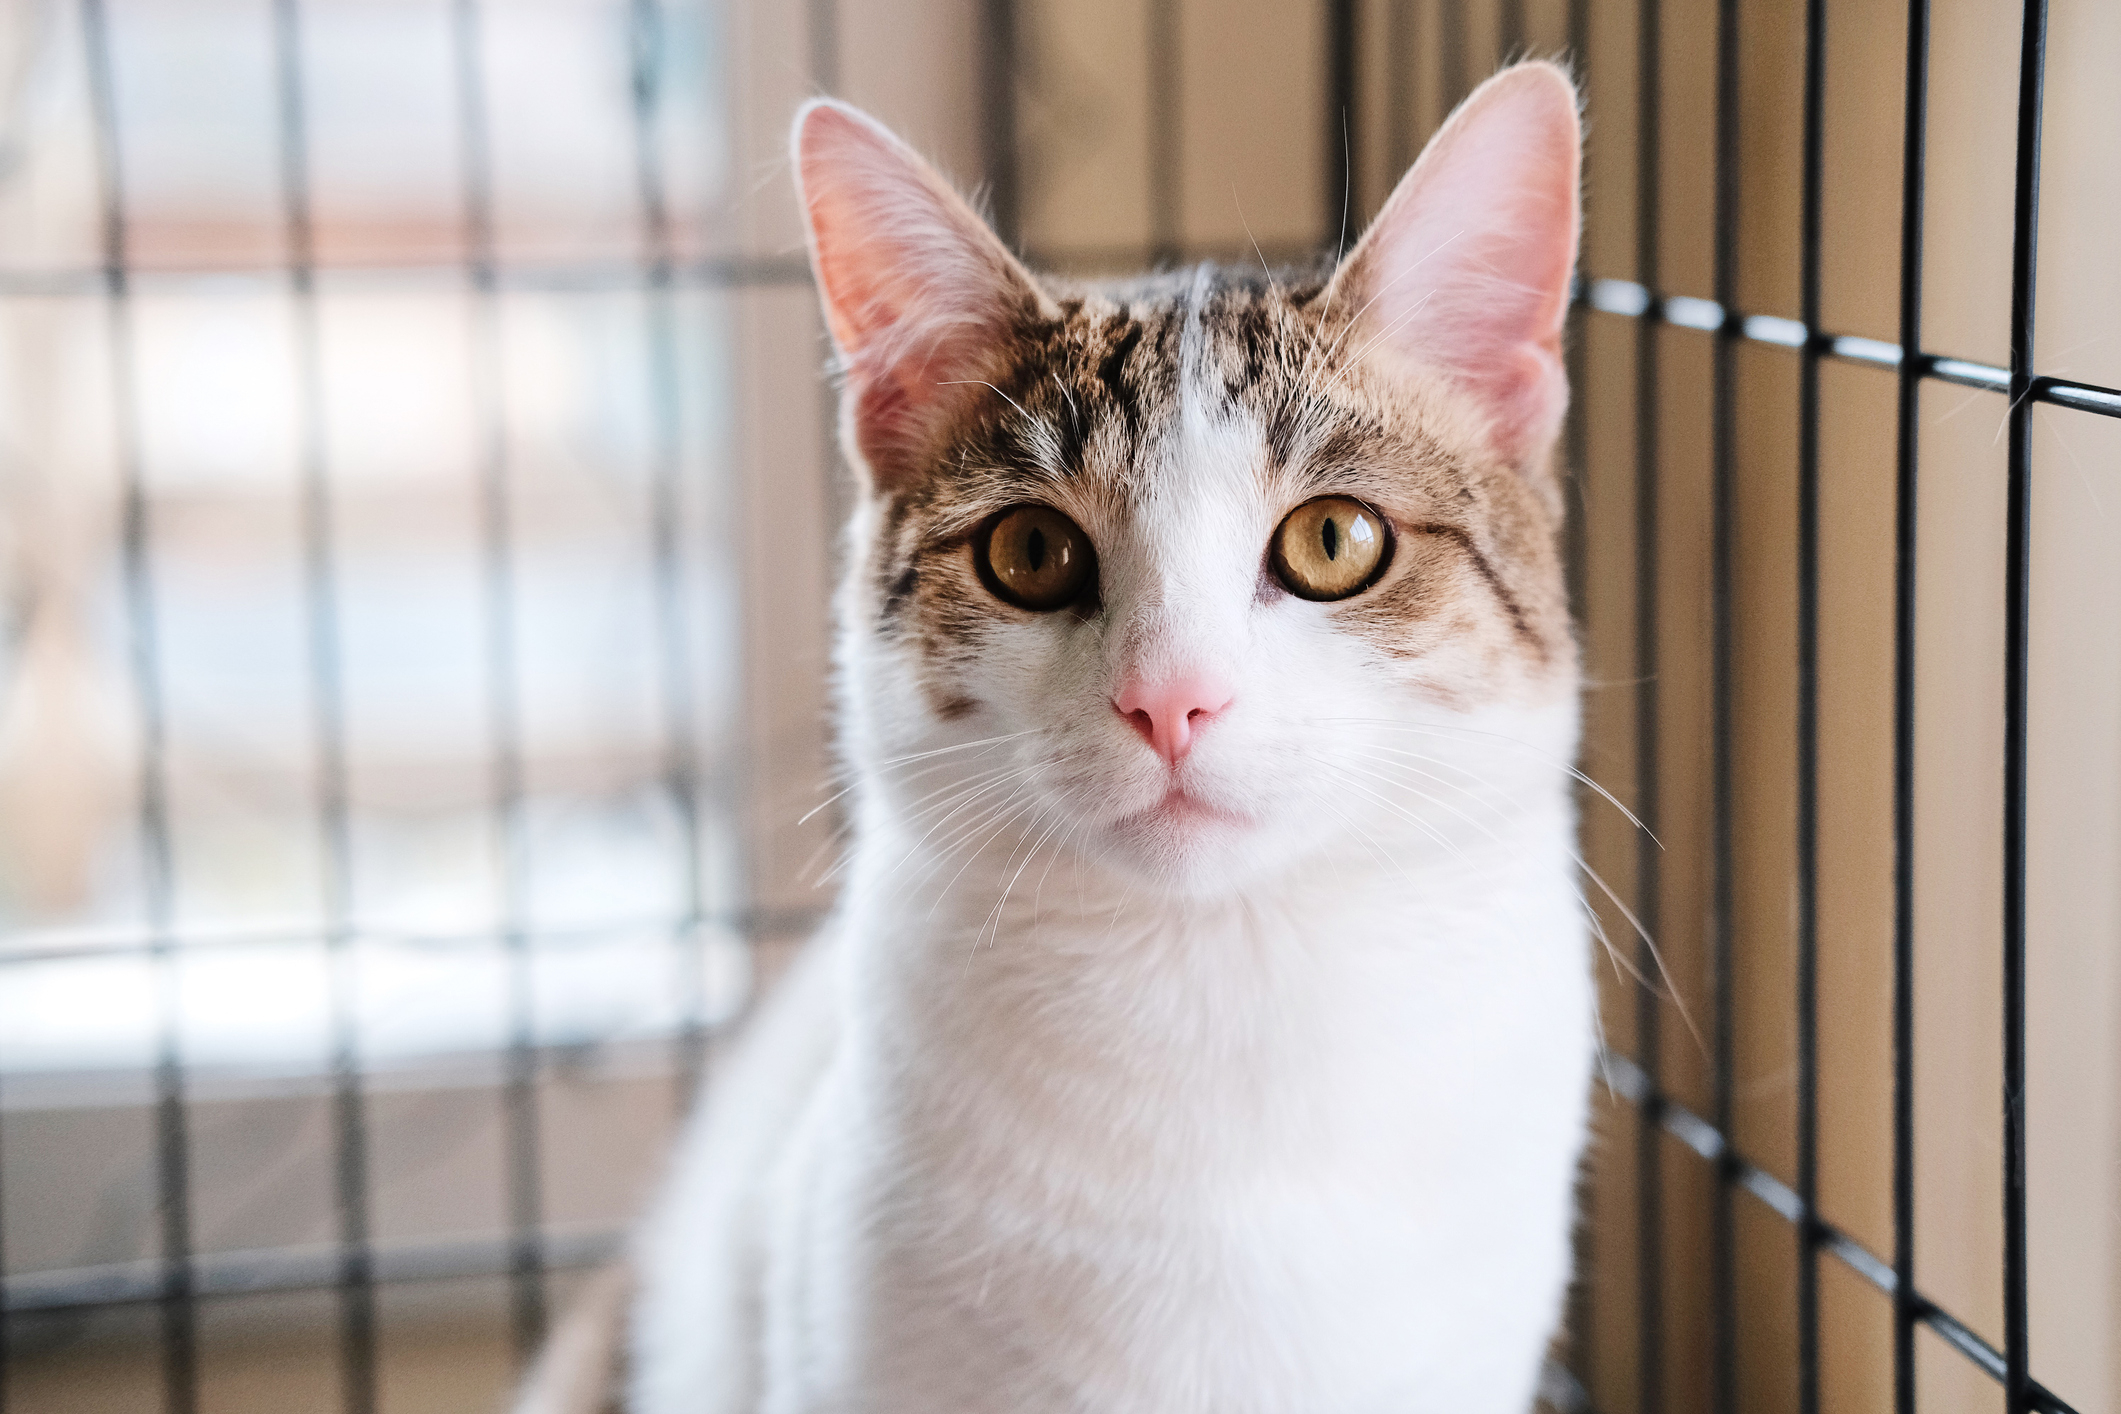 White cat with striking eyes looking directly at the camera, sitting inside a cage